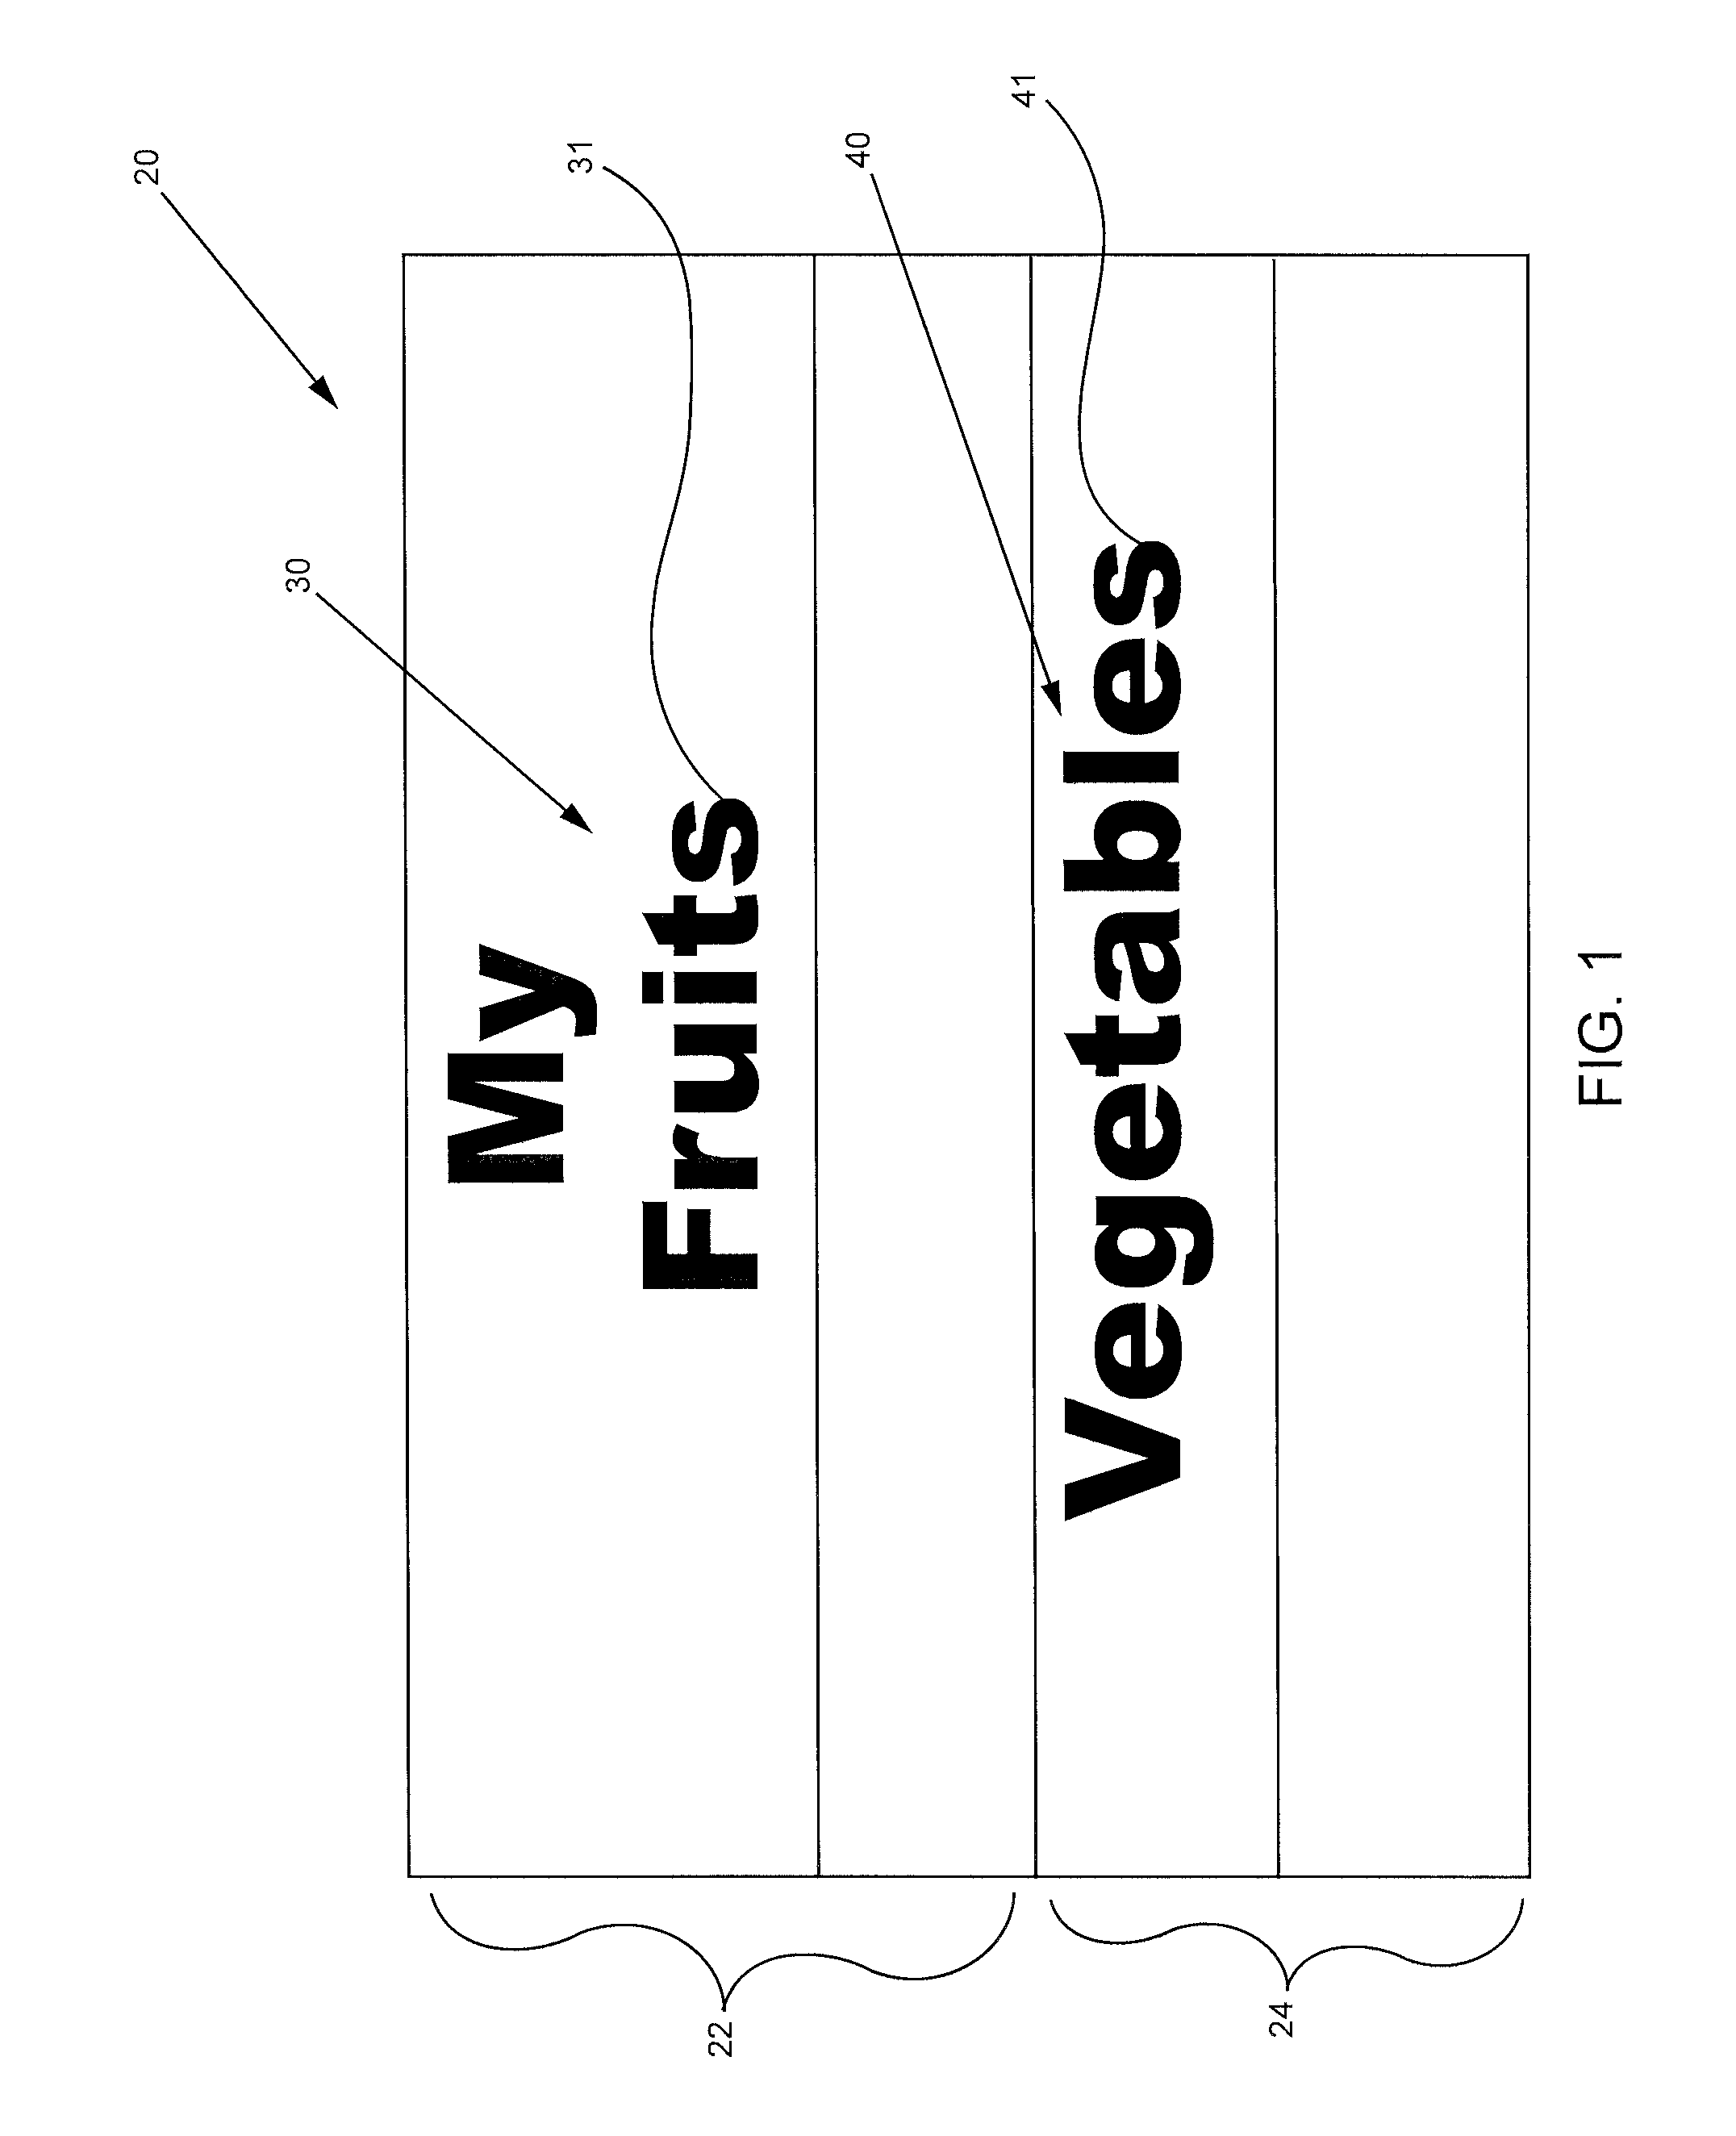 Nutrient consumption/expenditure planning and tracking apparatus system and method